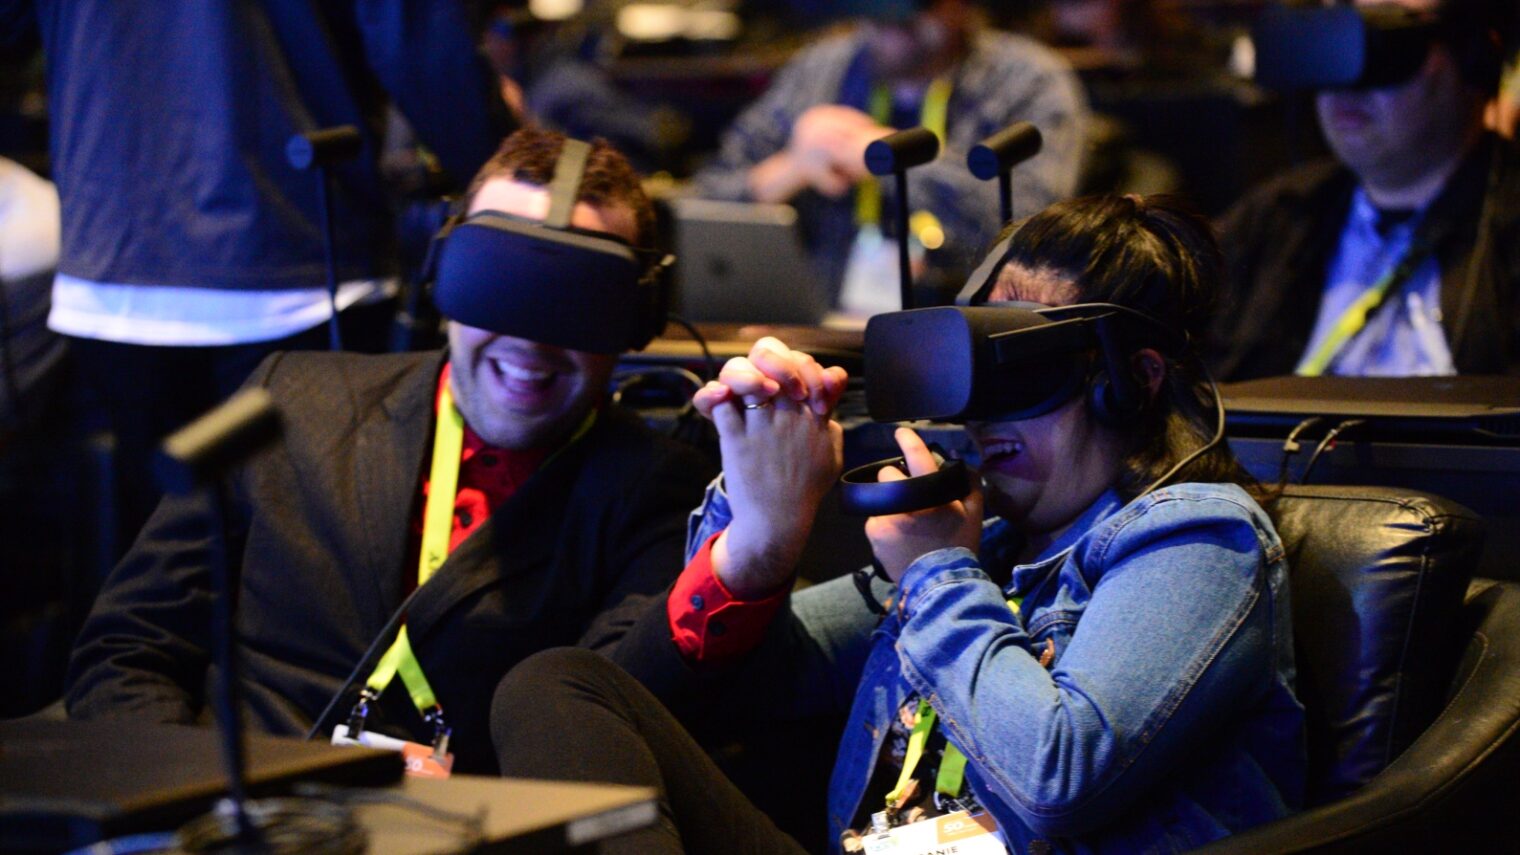 Intel Haifa created the tech inside the Project Alloy VR headset demonstrated at CES 2017. Photo: courtesy